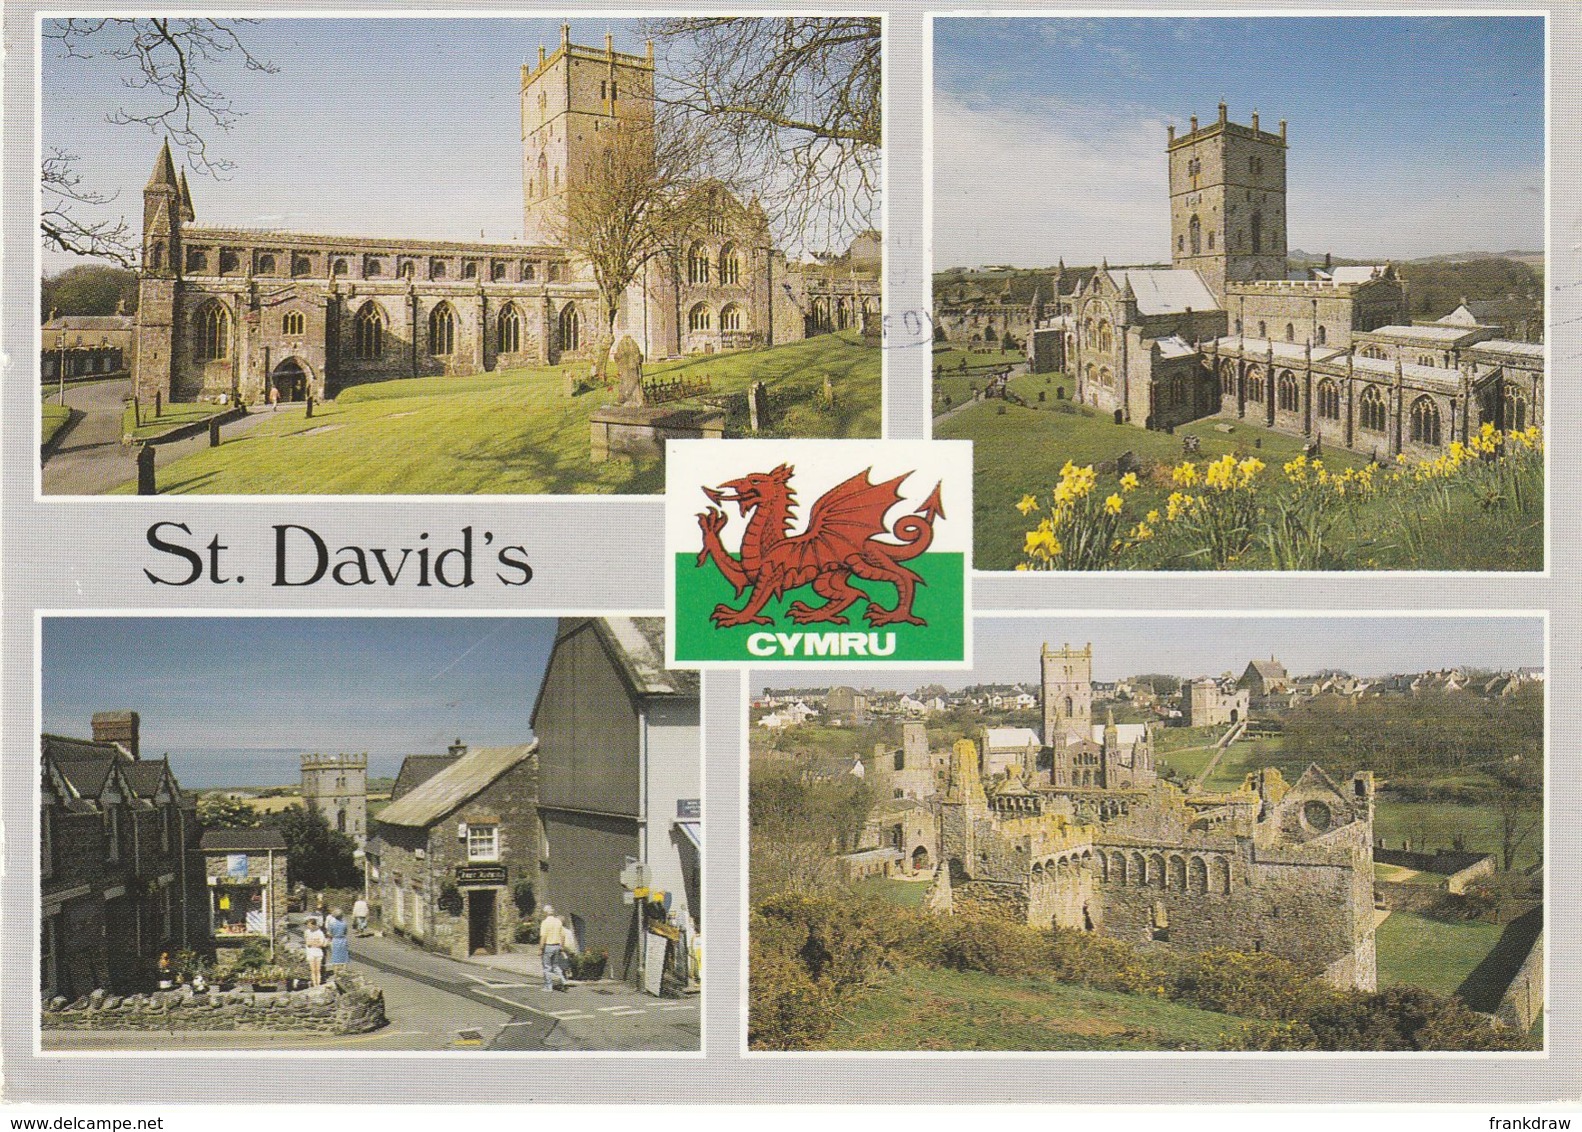 Postcard - St. David's - Cymru Four Views  Card No..c9779  Posted But Date Stamp Unread Able Very Good - Unclassified